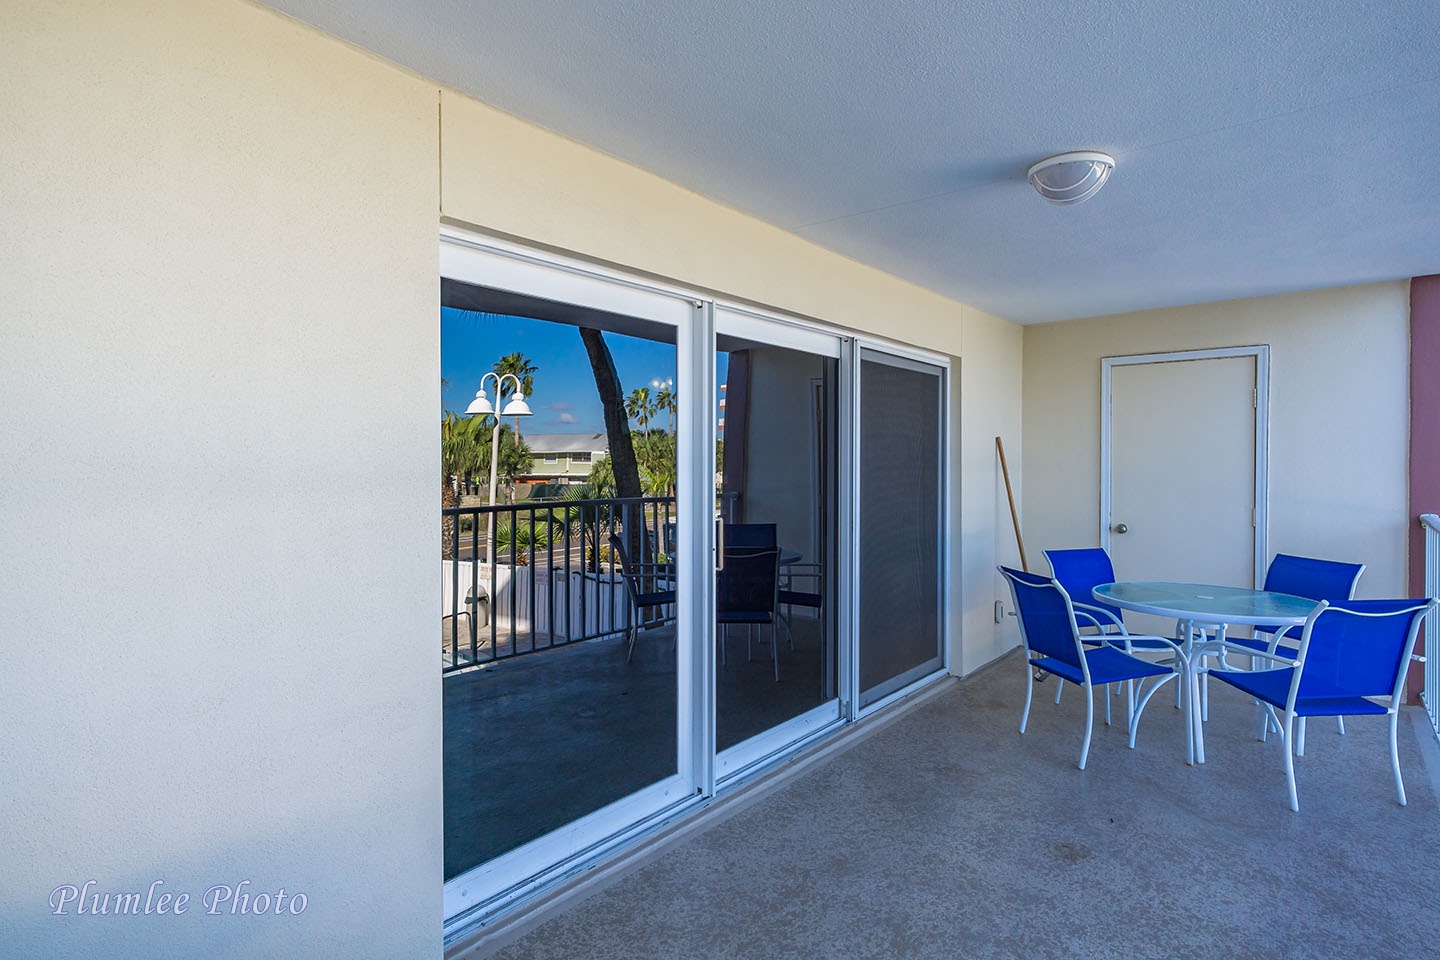 Large slider doors from the Living Room to the Balcony.